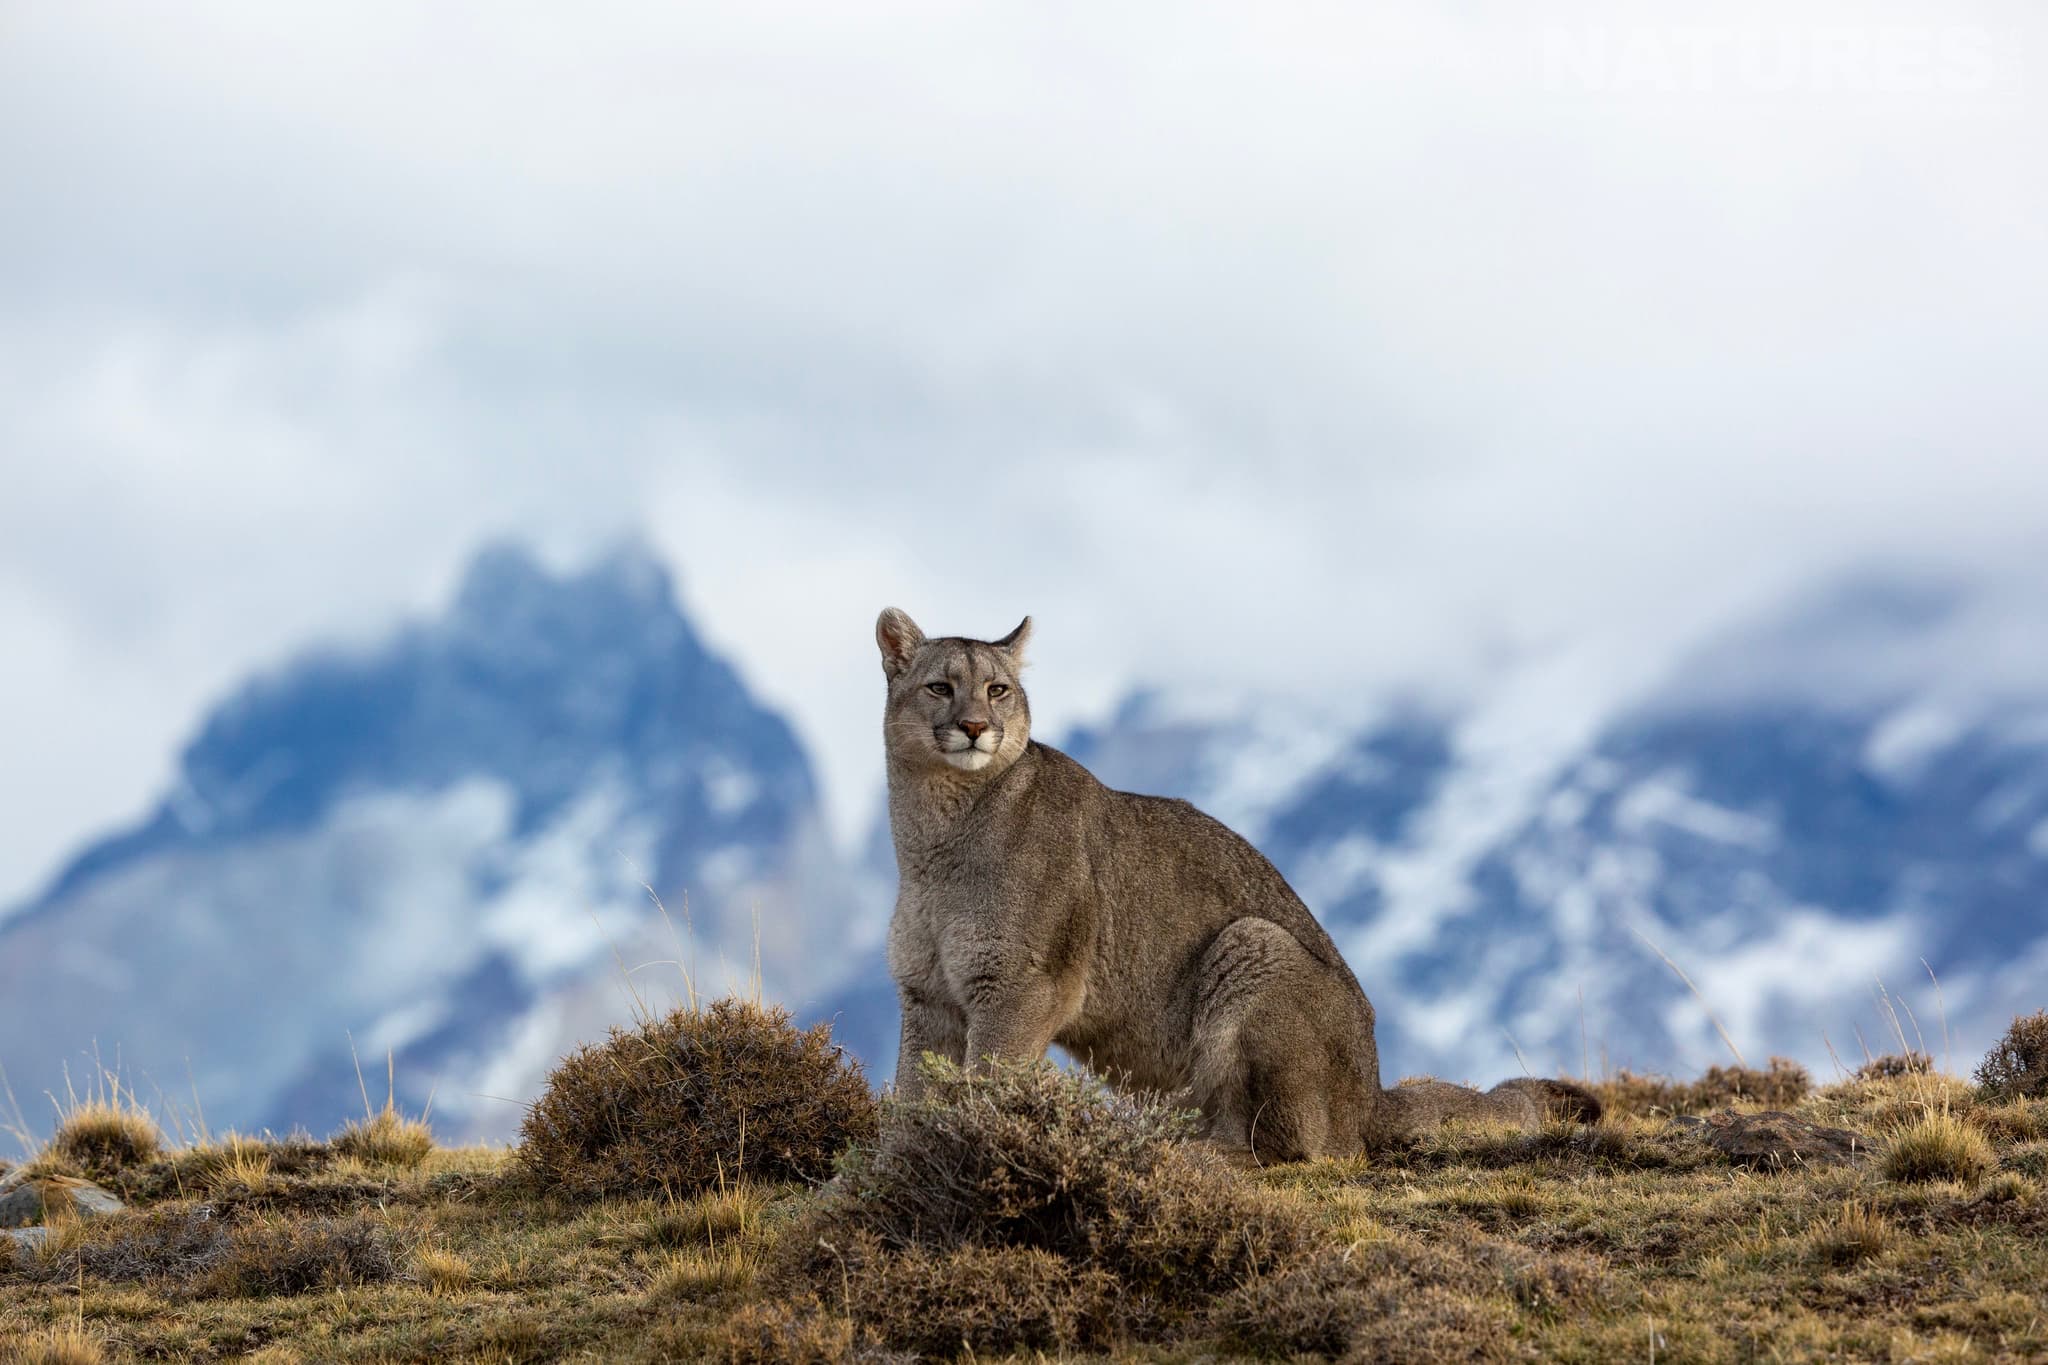 An Alert Puma Amongst The Grass, With The Towers Of Torres Del Paine Behind